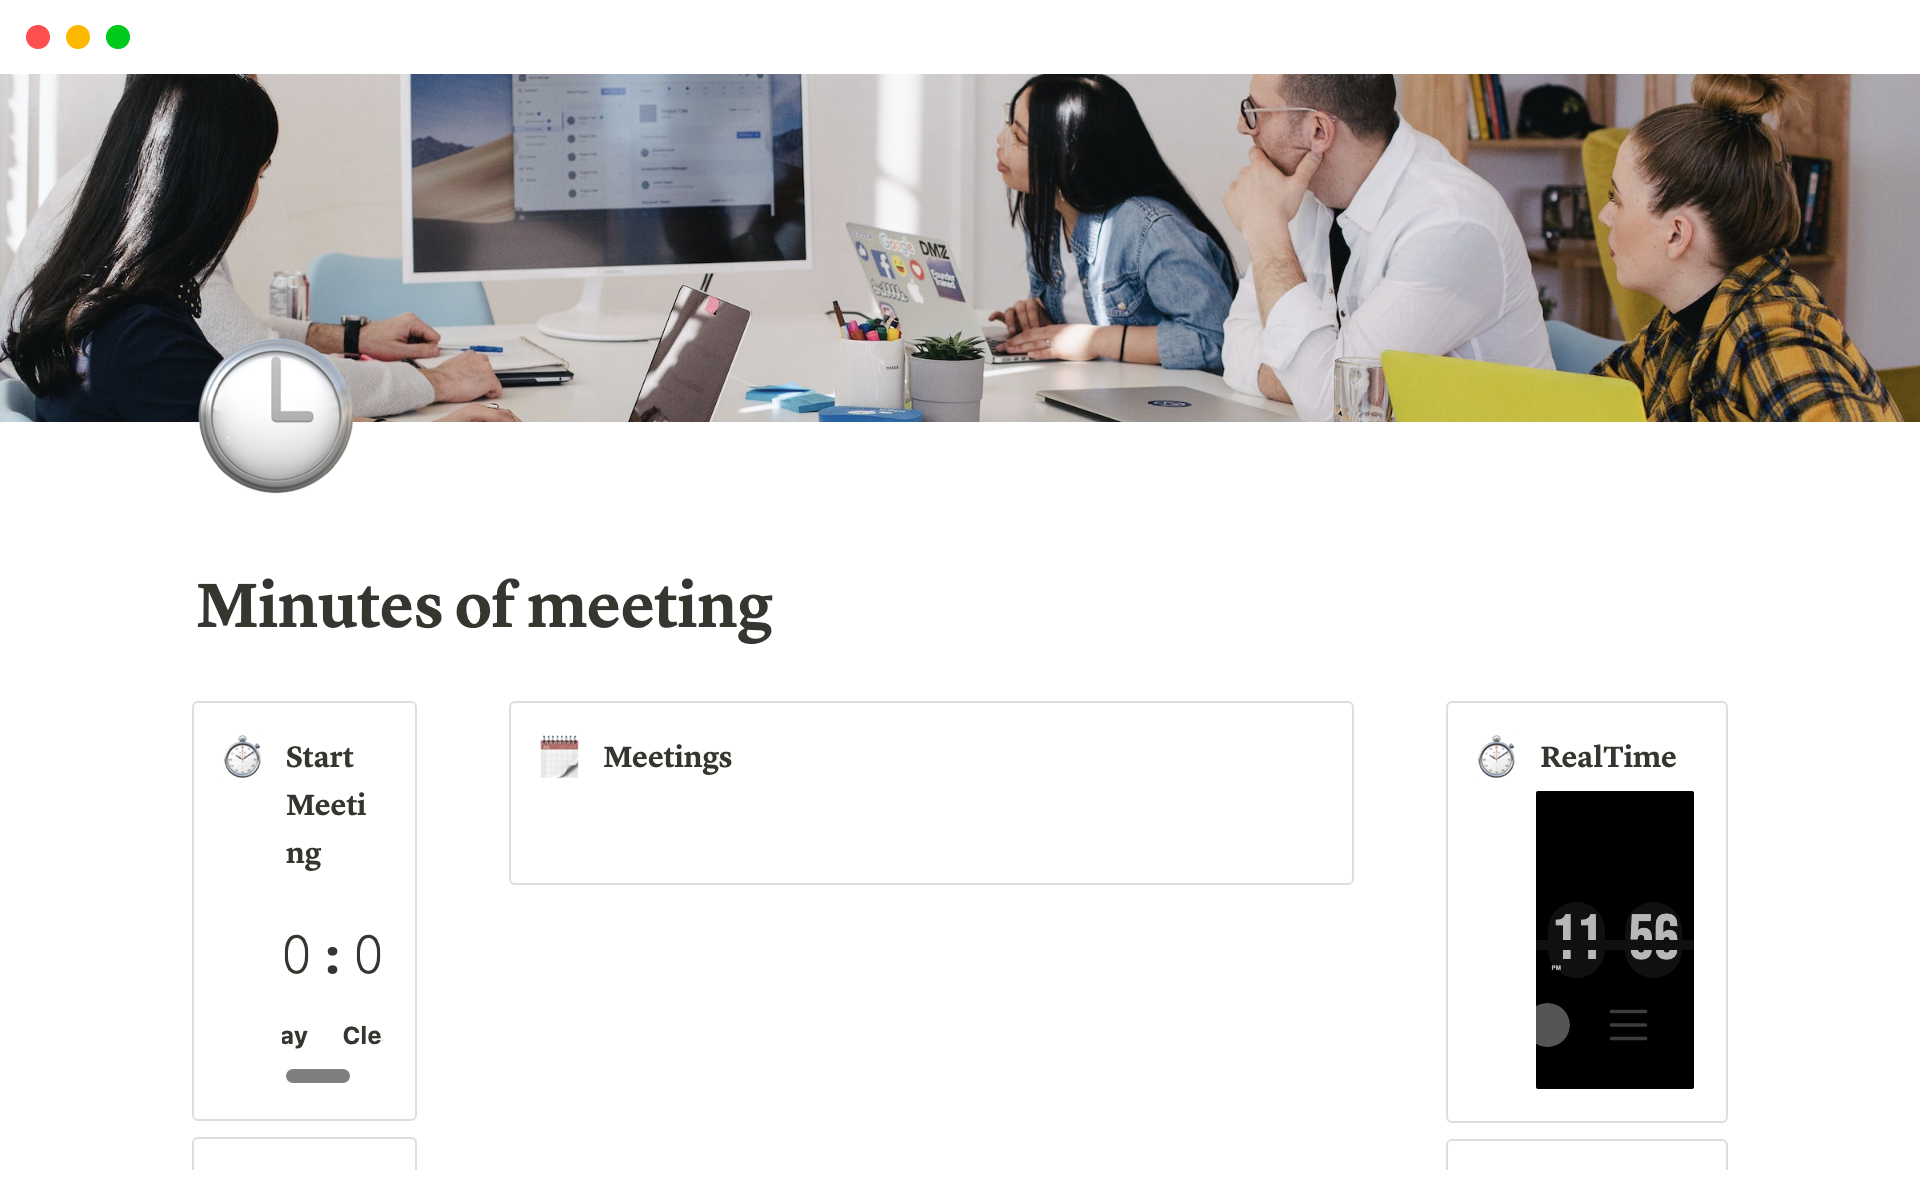 Effectively record and organize key discussion points, decisions, and action items from your meetings in a concise and structured format.